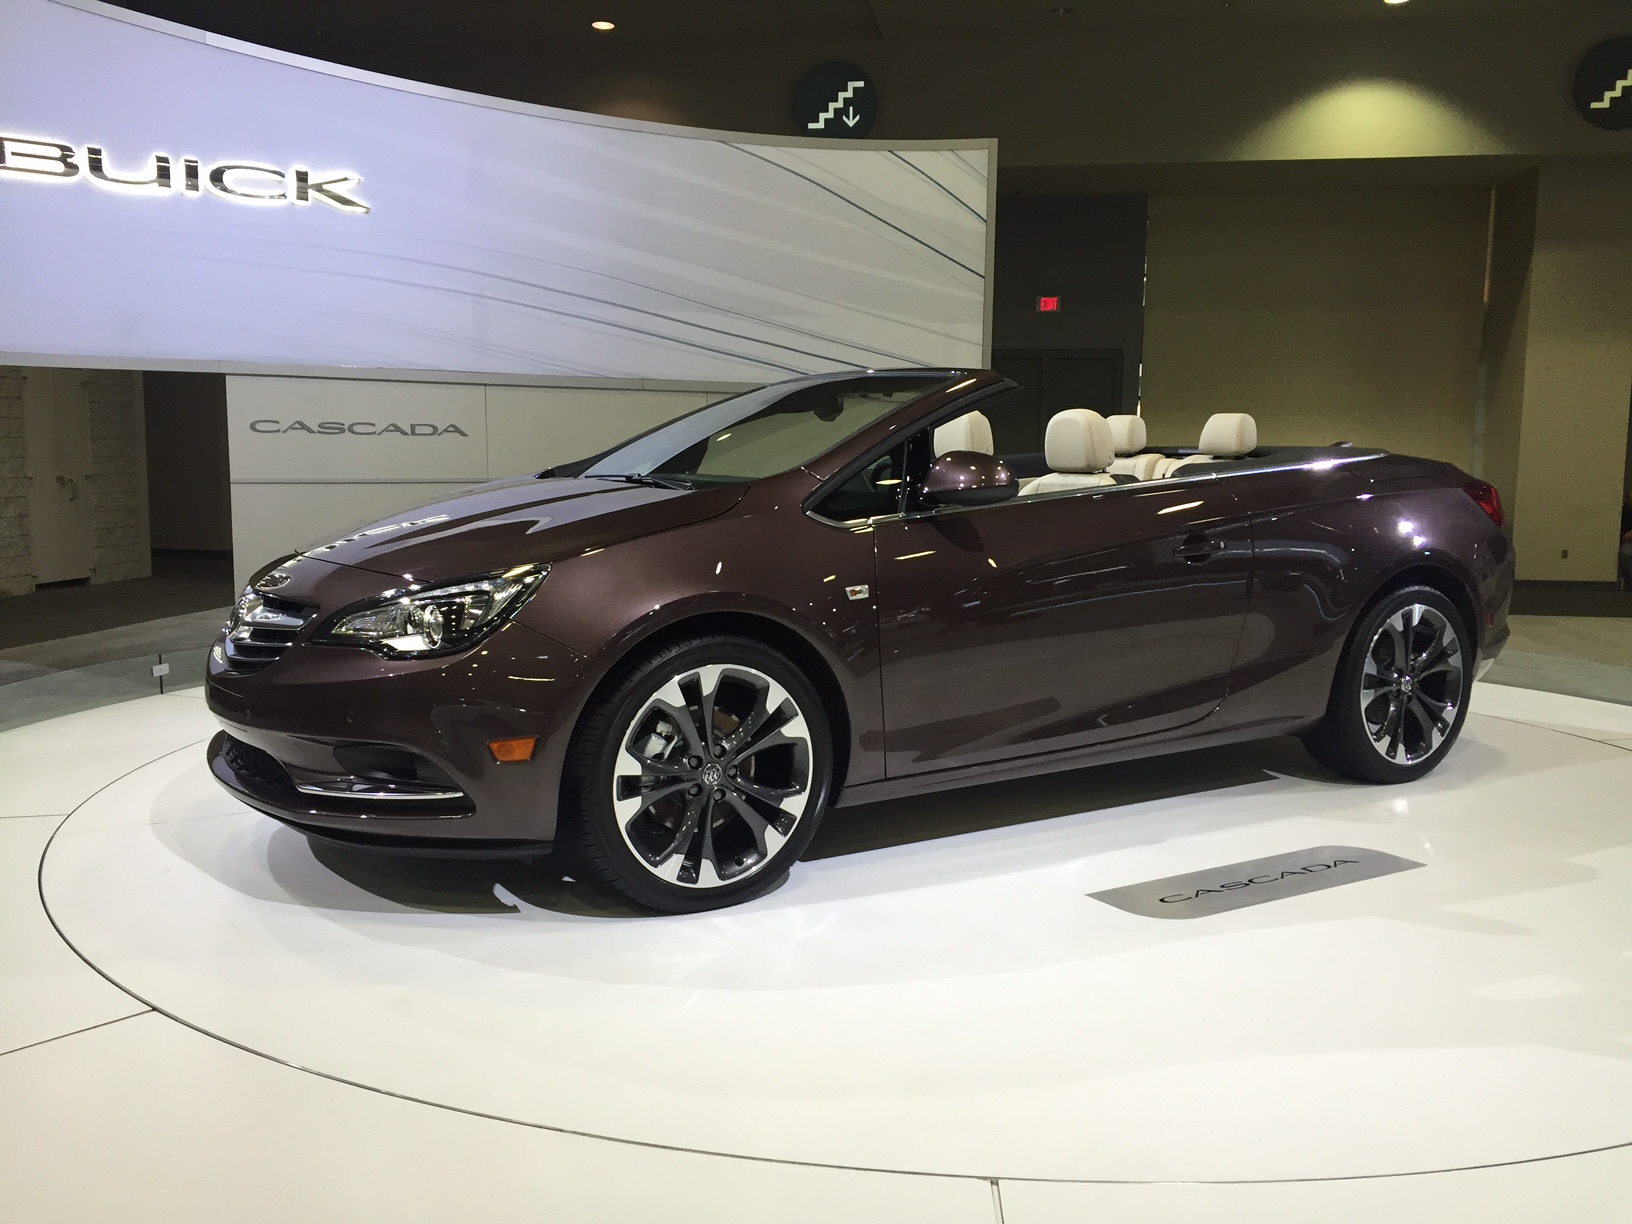 Based on a European model, the Cascada is Buick's first convertible in 25 years 